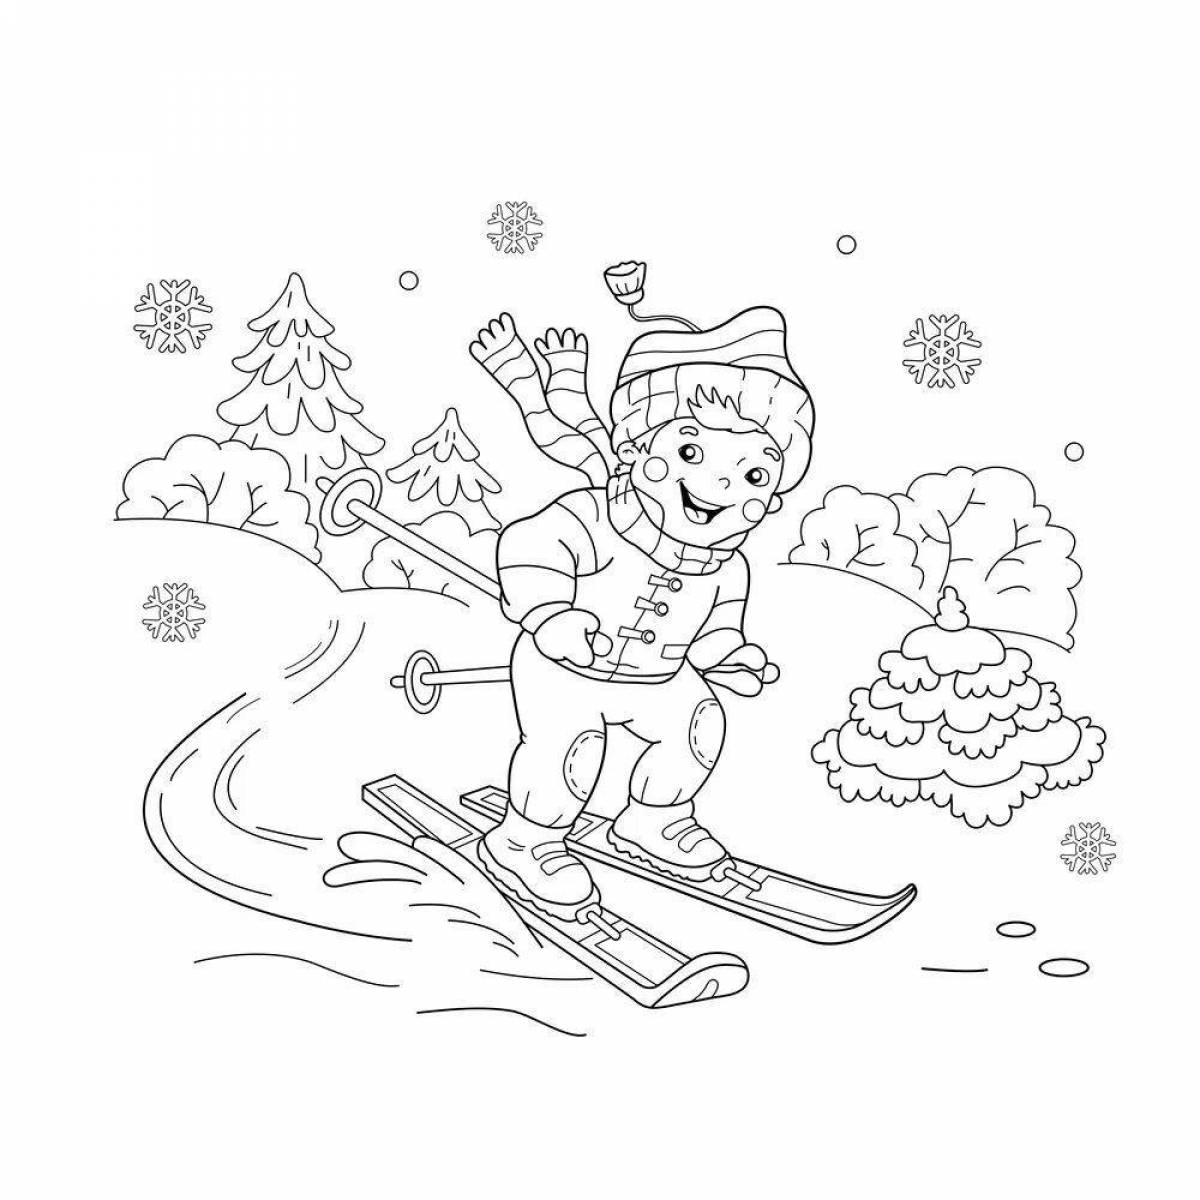 Fantastic coloring book for skiing